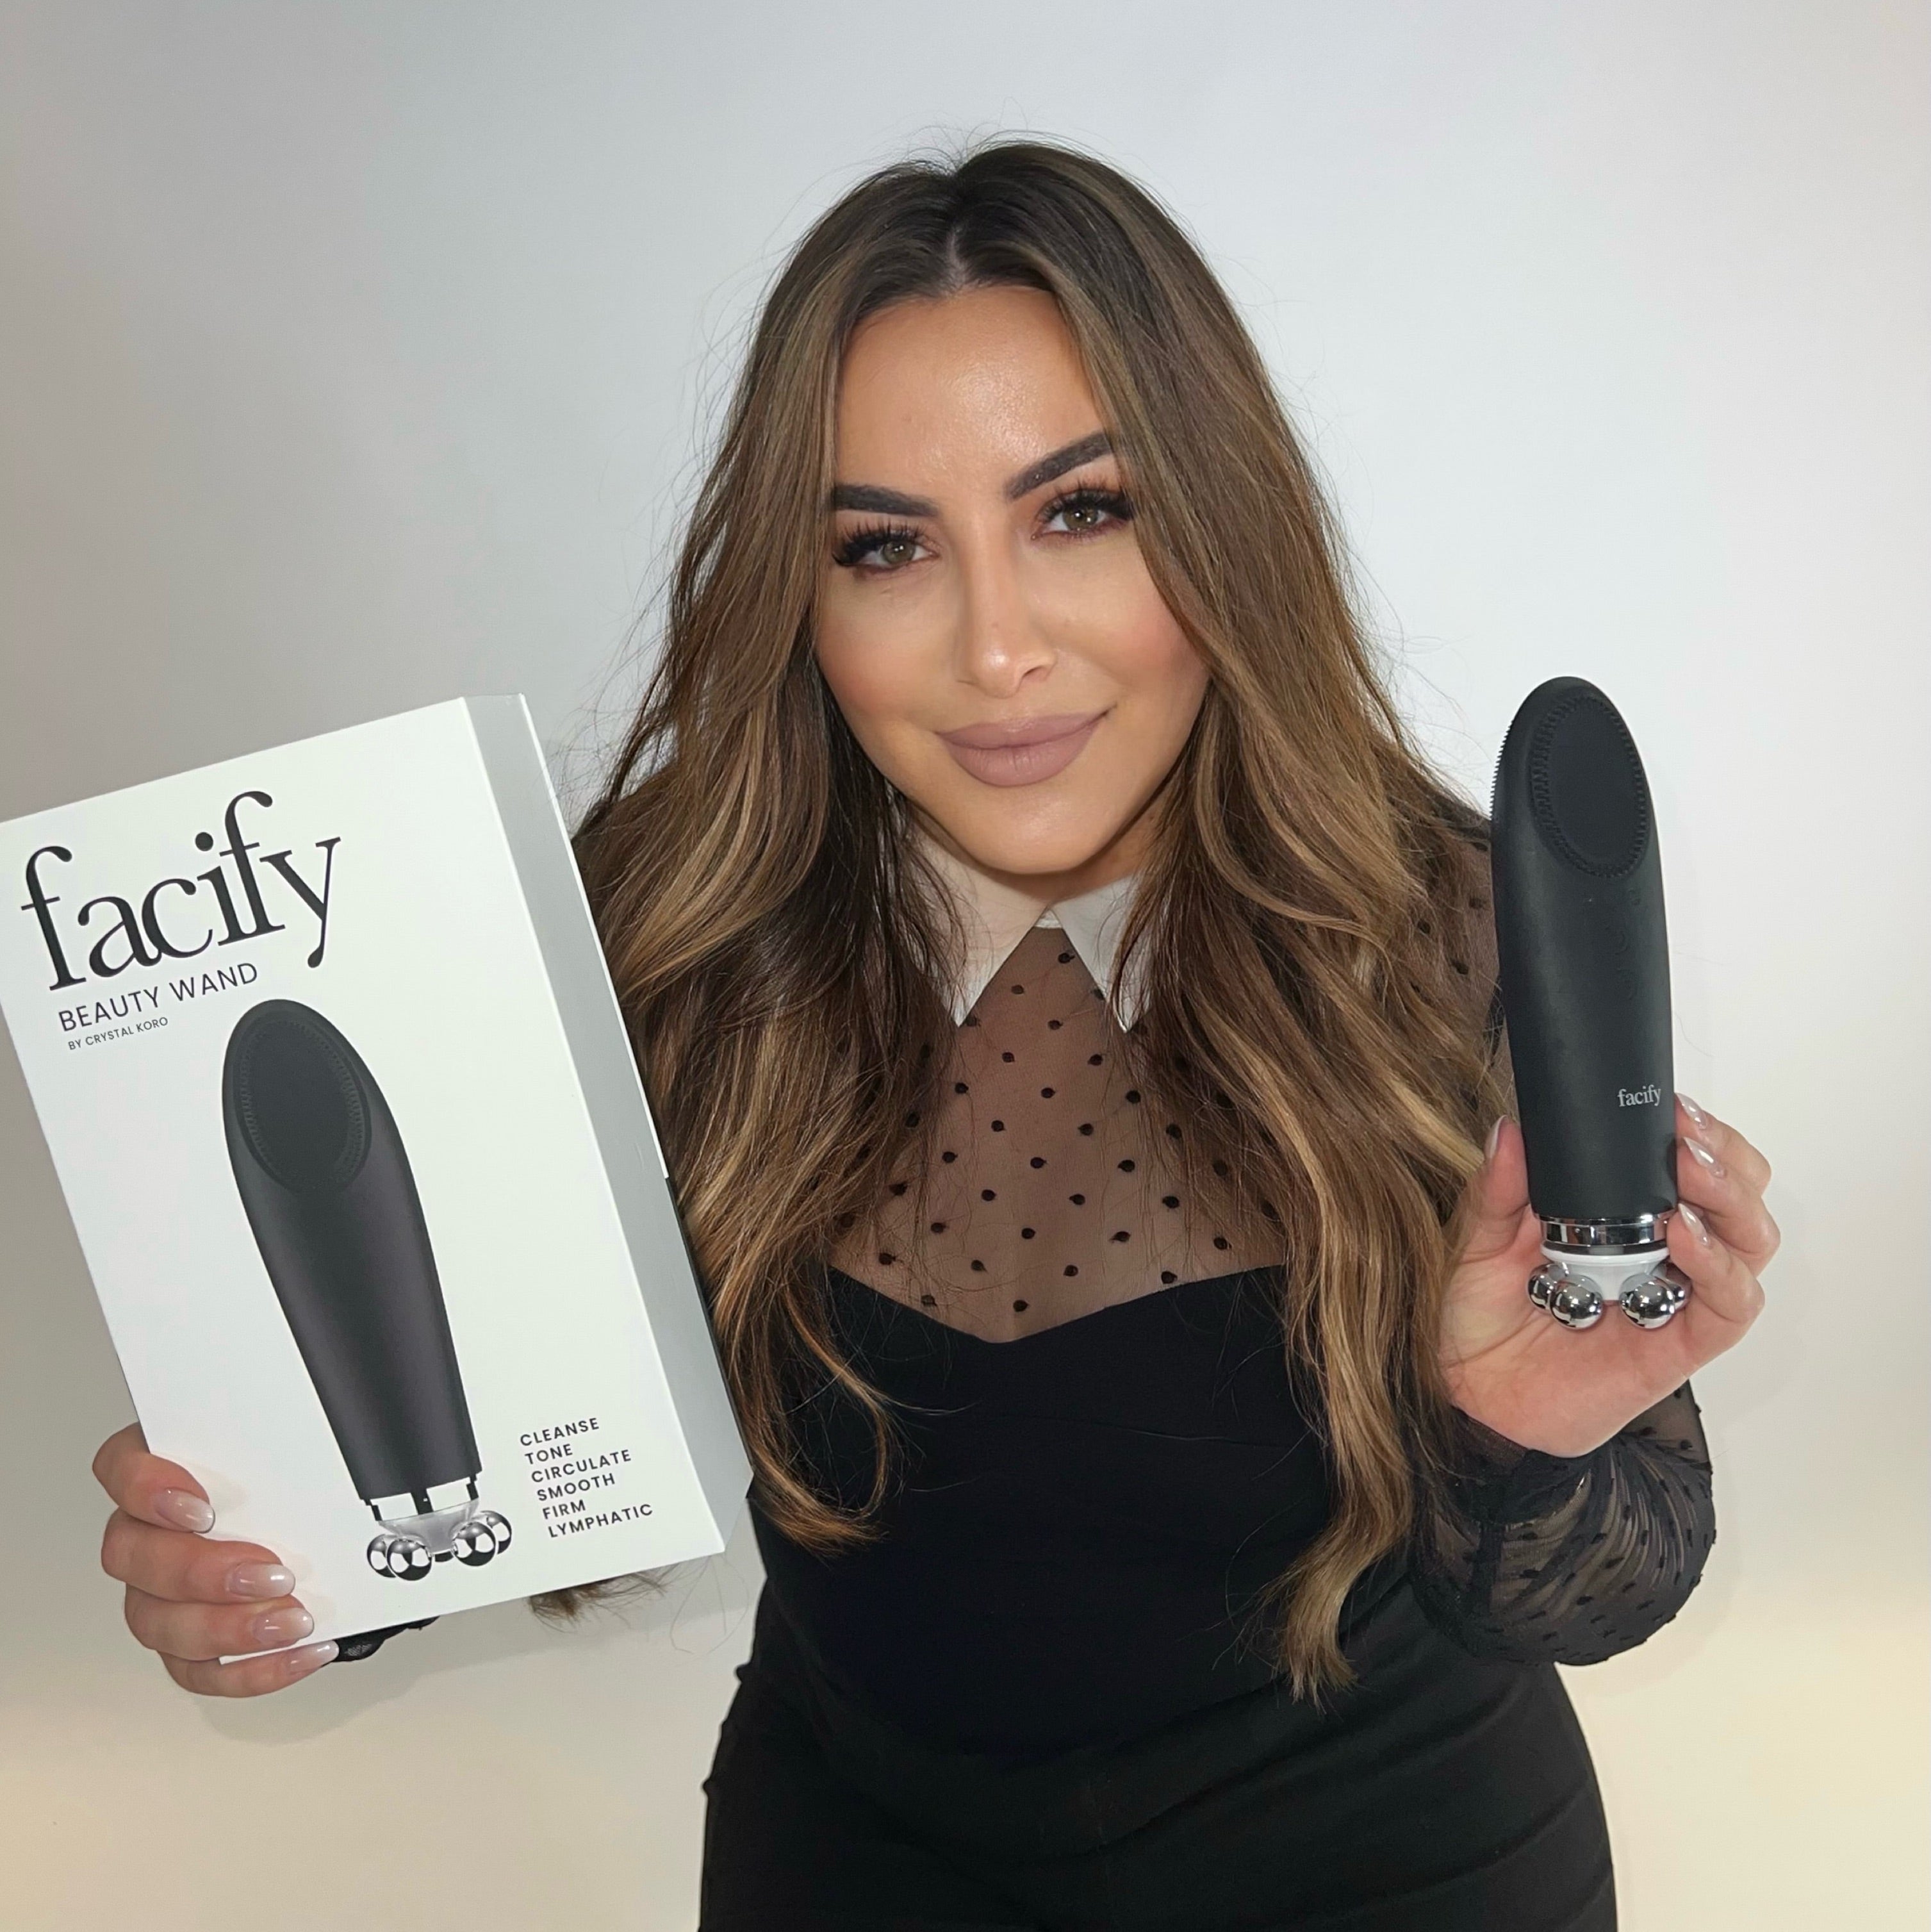 crystal koro founder of the facify beauty wand device holding up the product packaging and wand smiling